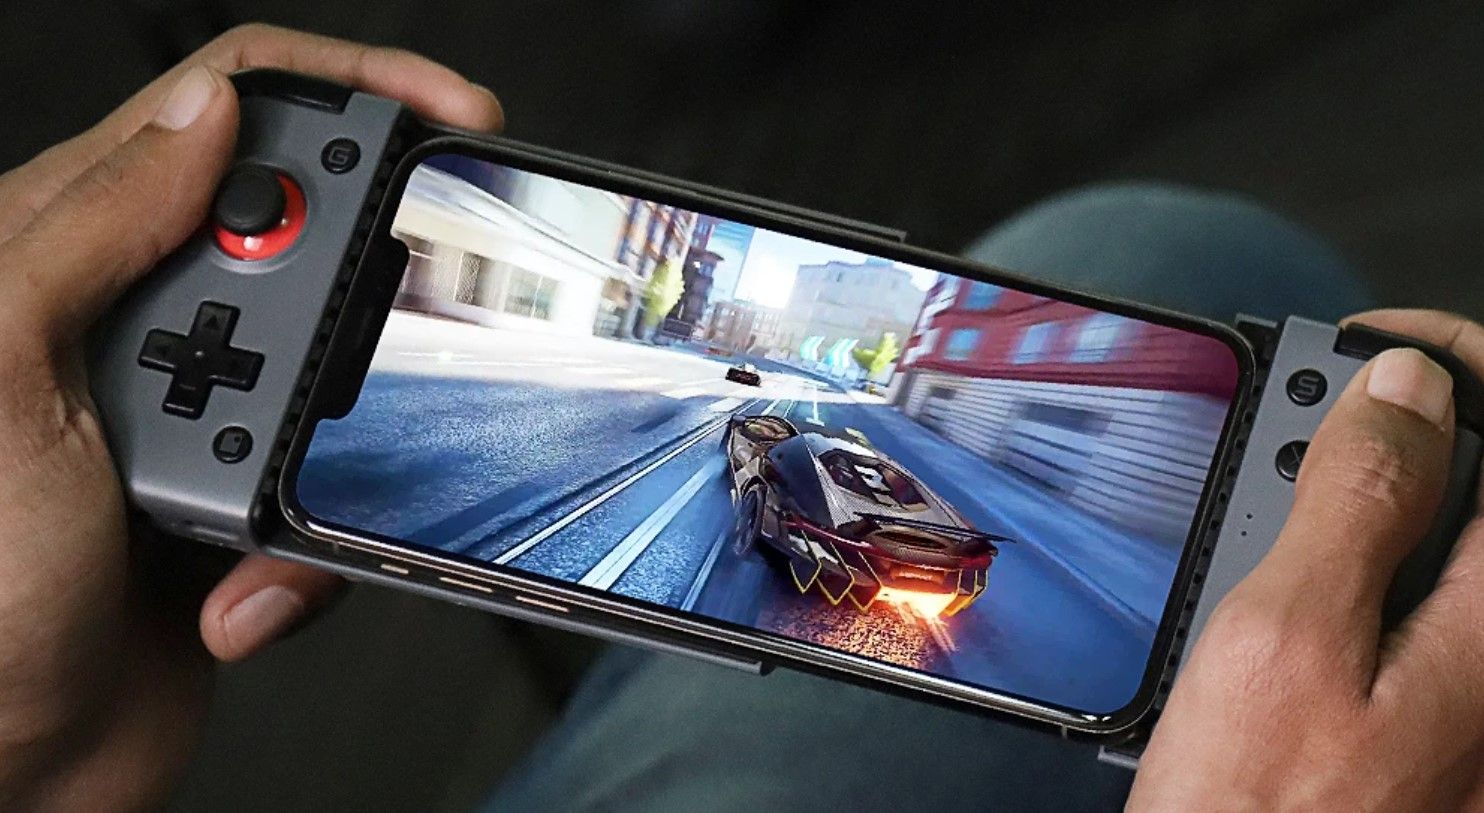 GameSir X2 Pro review: mobile game controller is (mostly) a winner